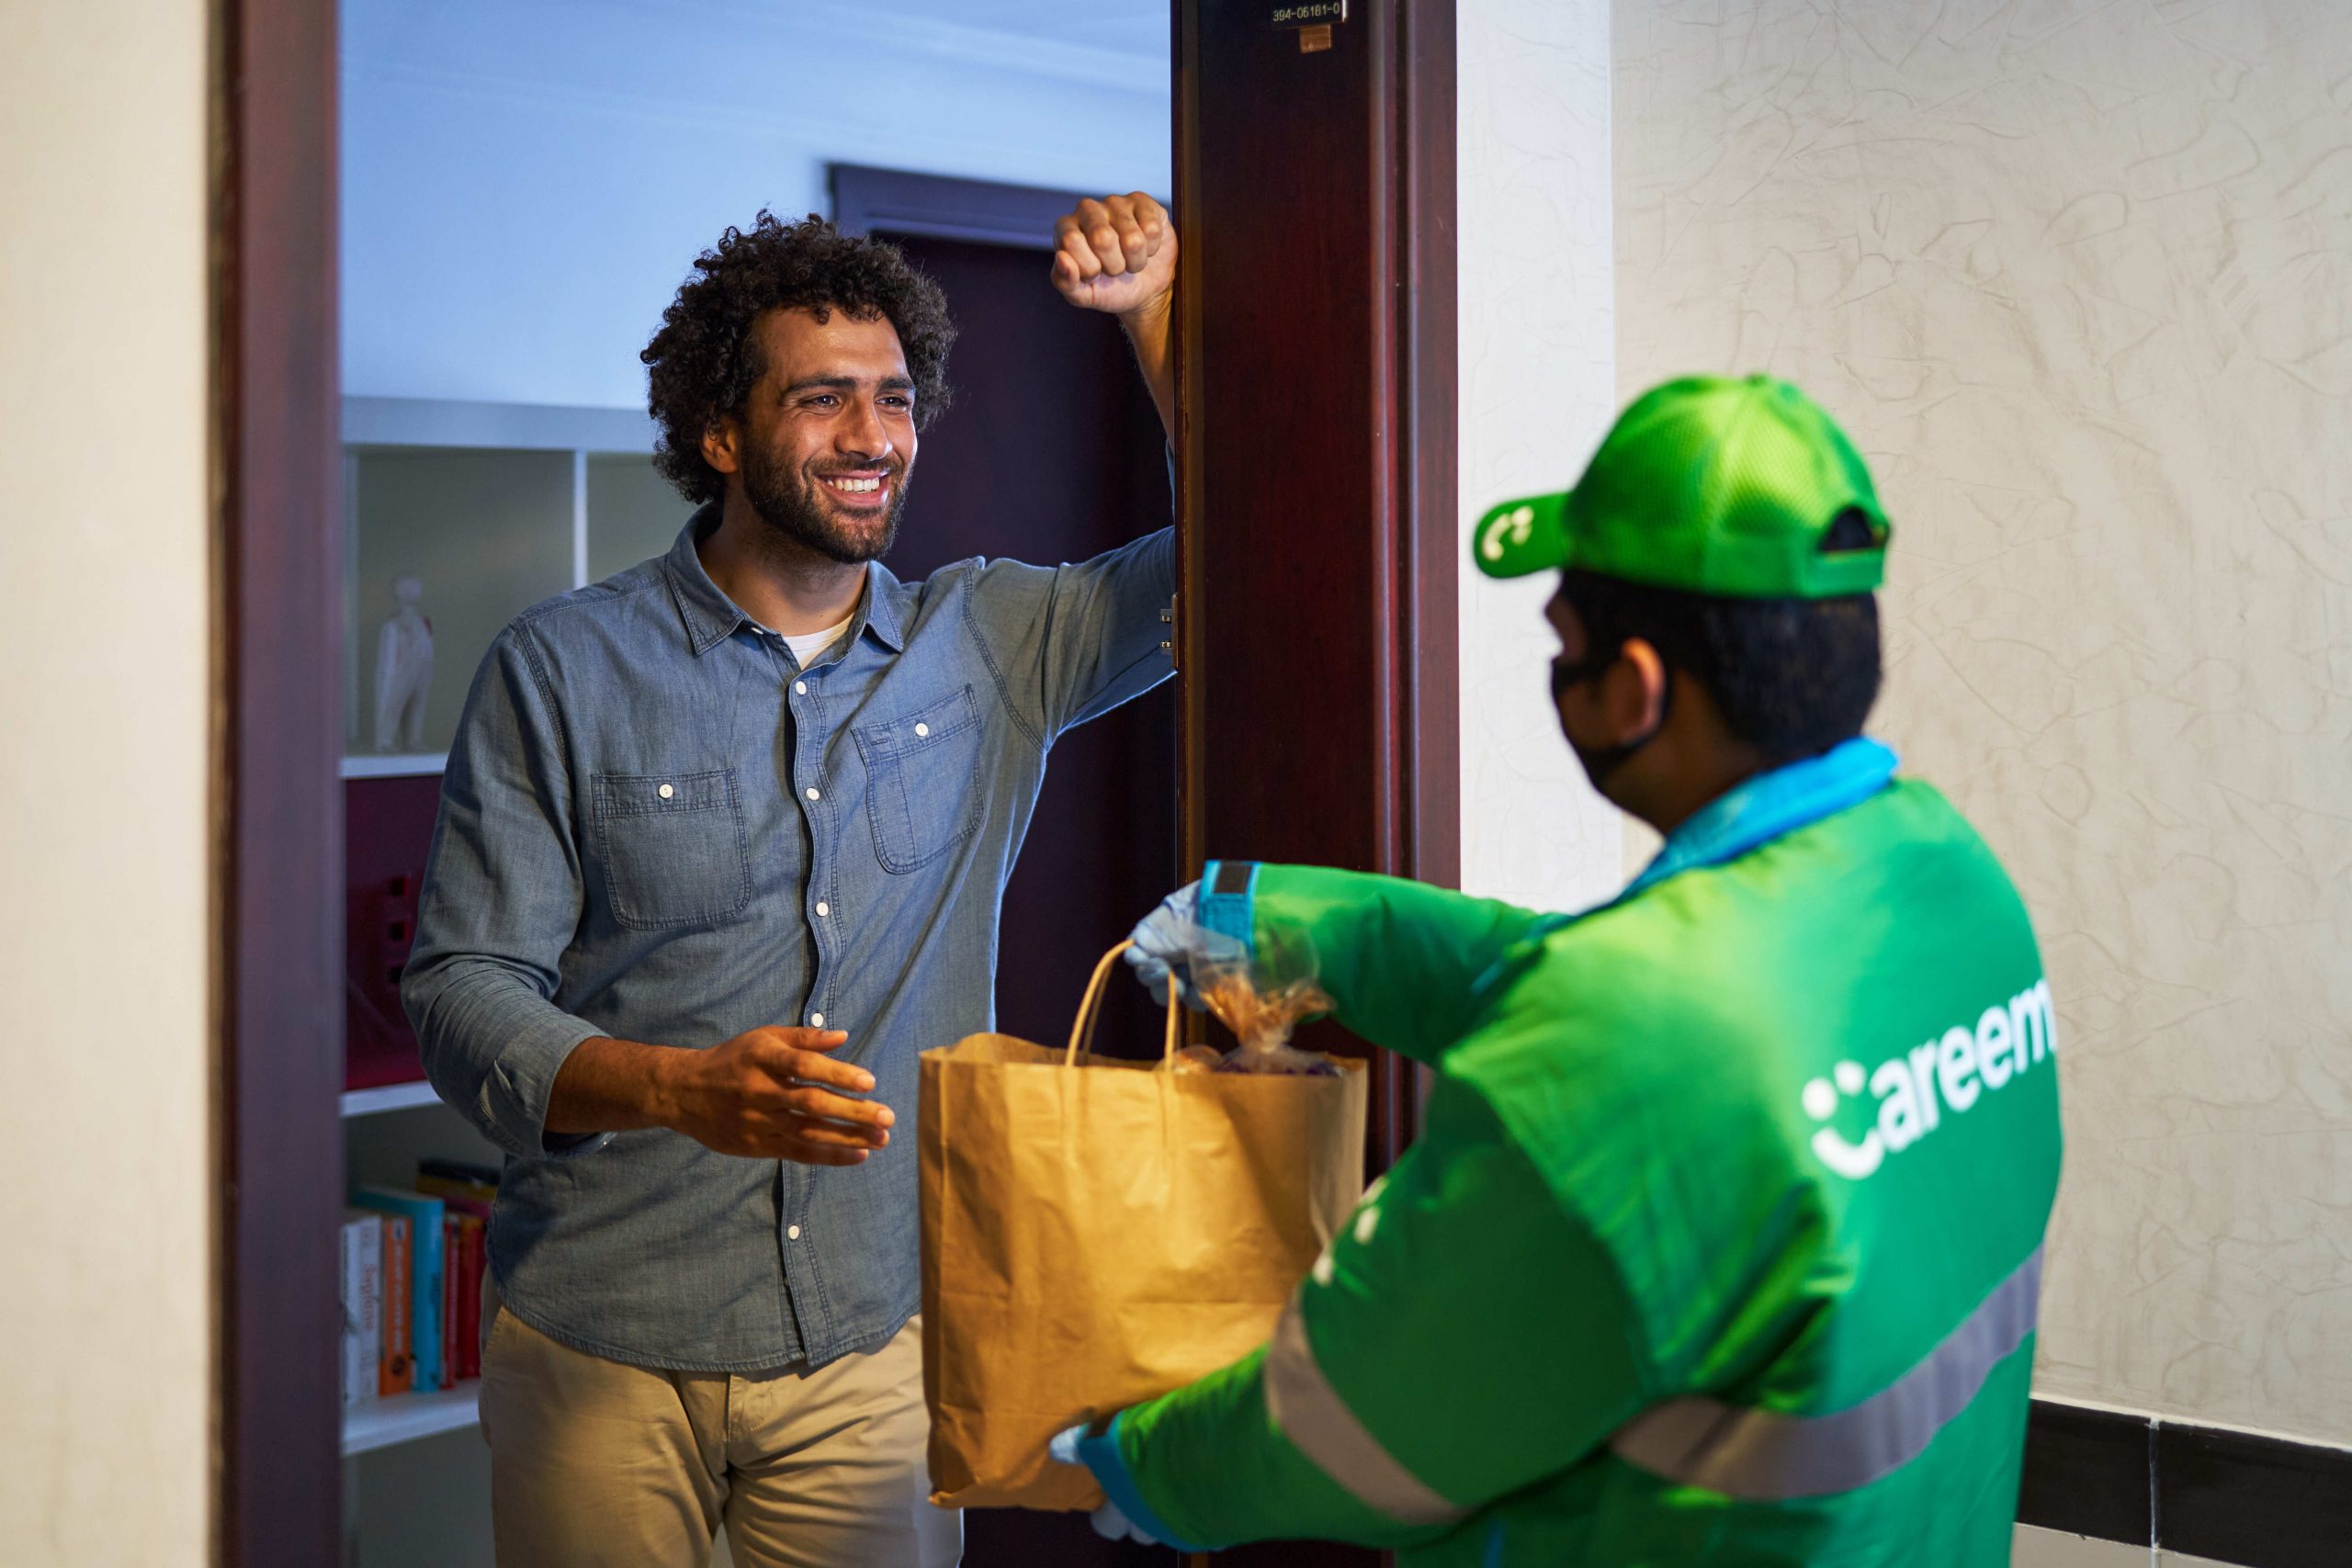 Careem launches food delivery service in Qatar